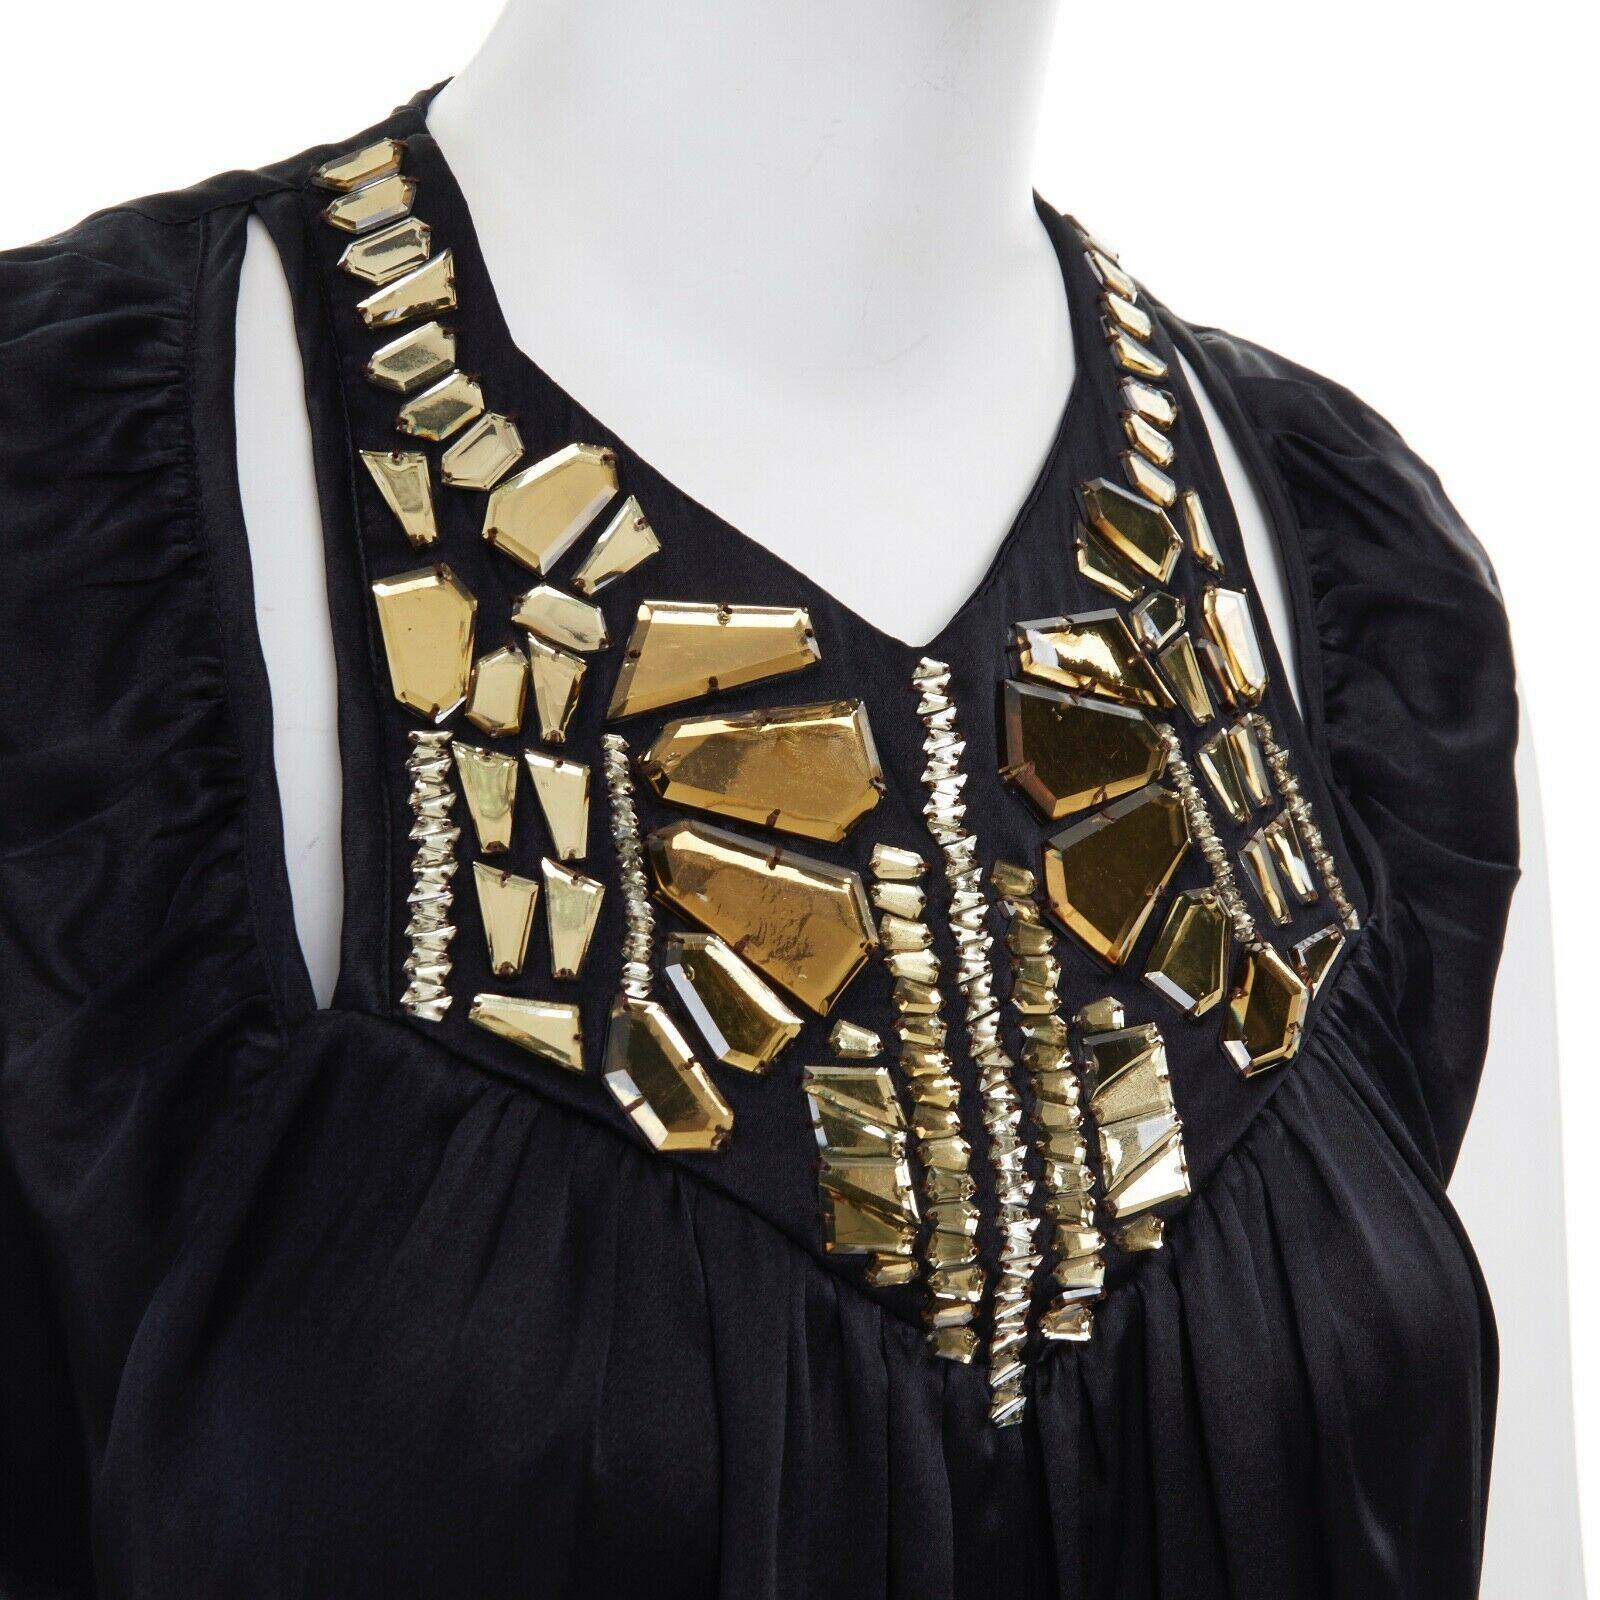 GIVENCHY TISCI 100% silk yellow acrylic applique collar sleeveless top FR38 S
GIVENCHY BY RICCARDO TISCI
100% silk. 
Black. 
Gold yellow angular cut applique at neckline. 
V-neck. 
Cut out detail. 
Ruched along neckline. 
Sleeveless top. 
Made in